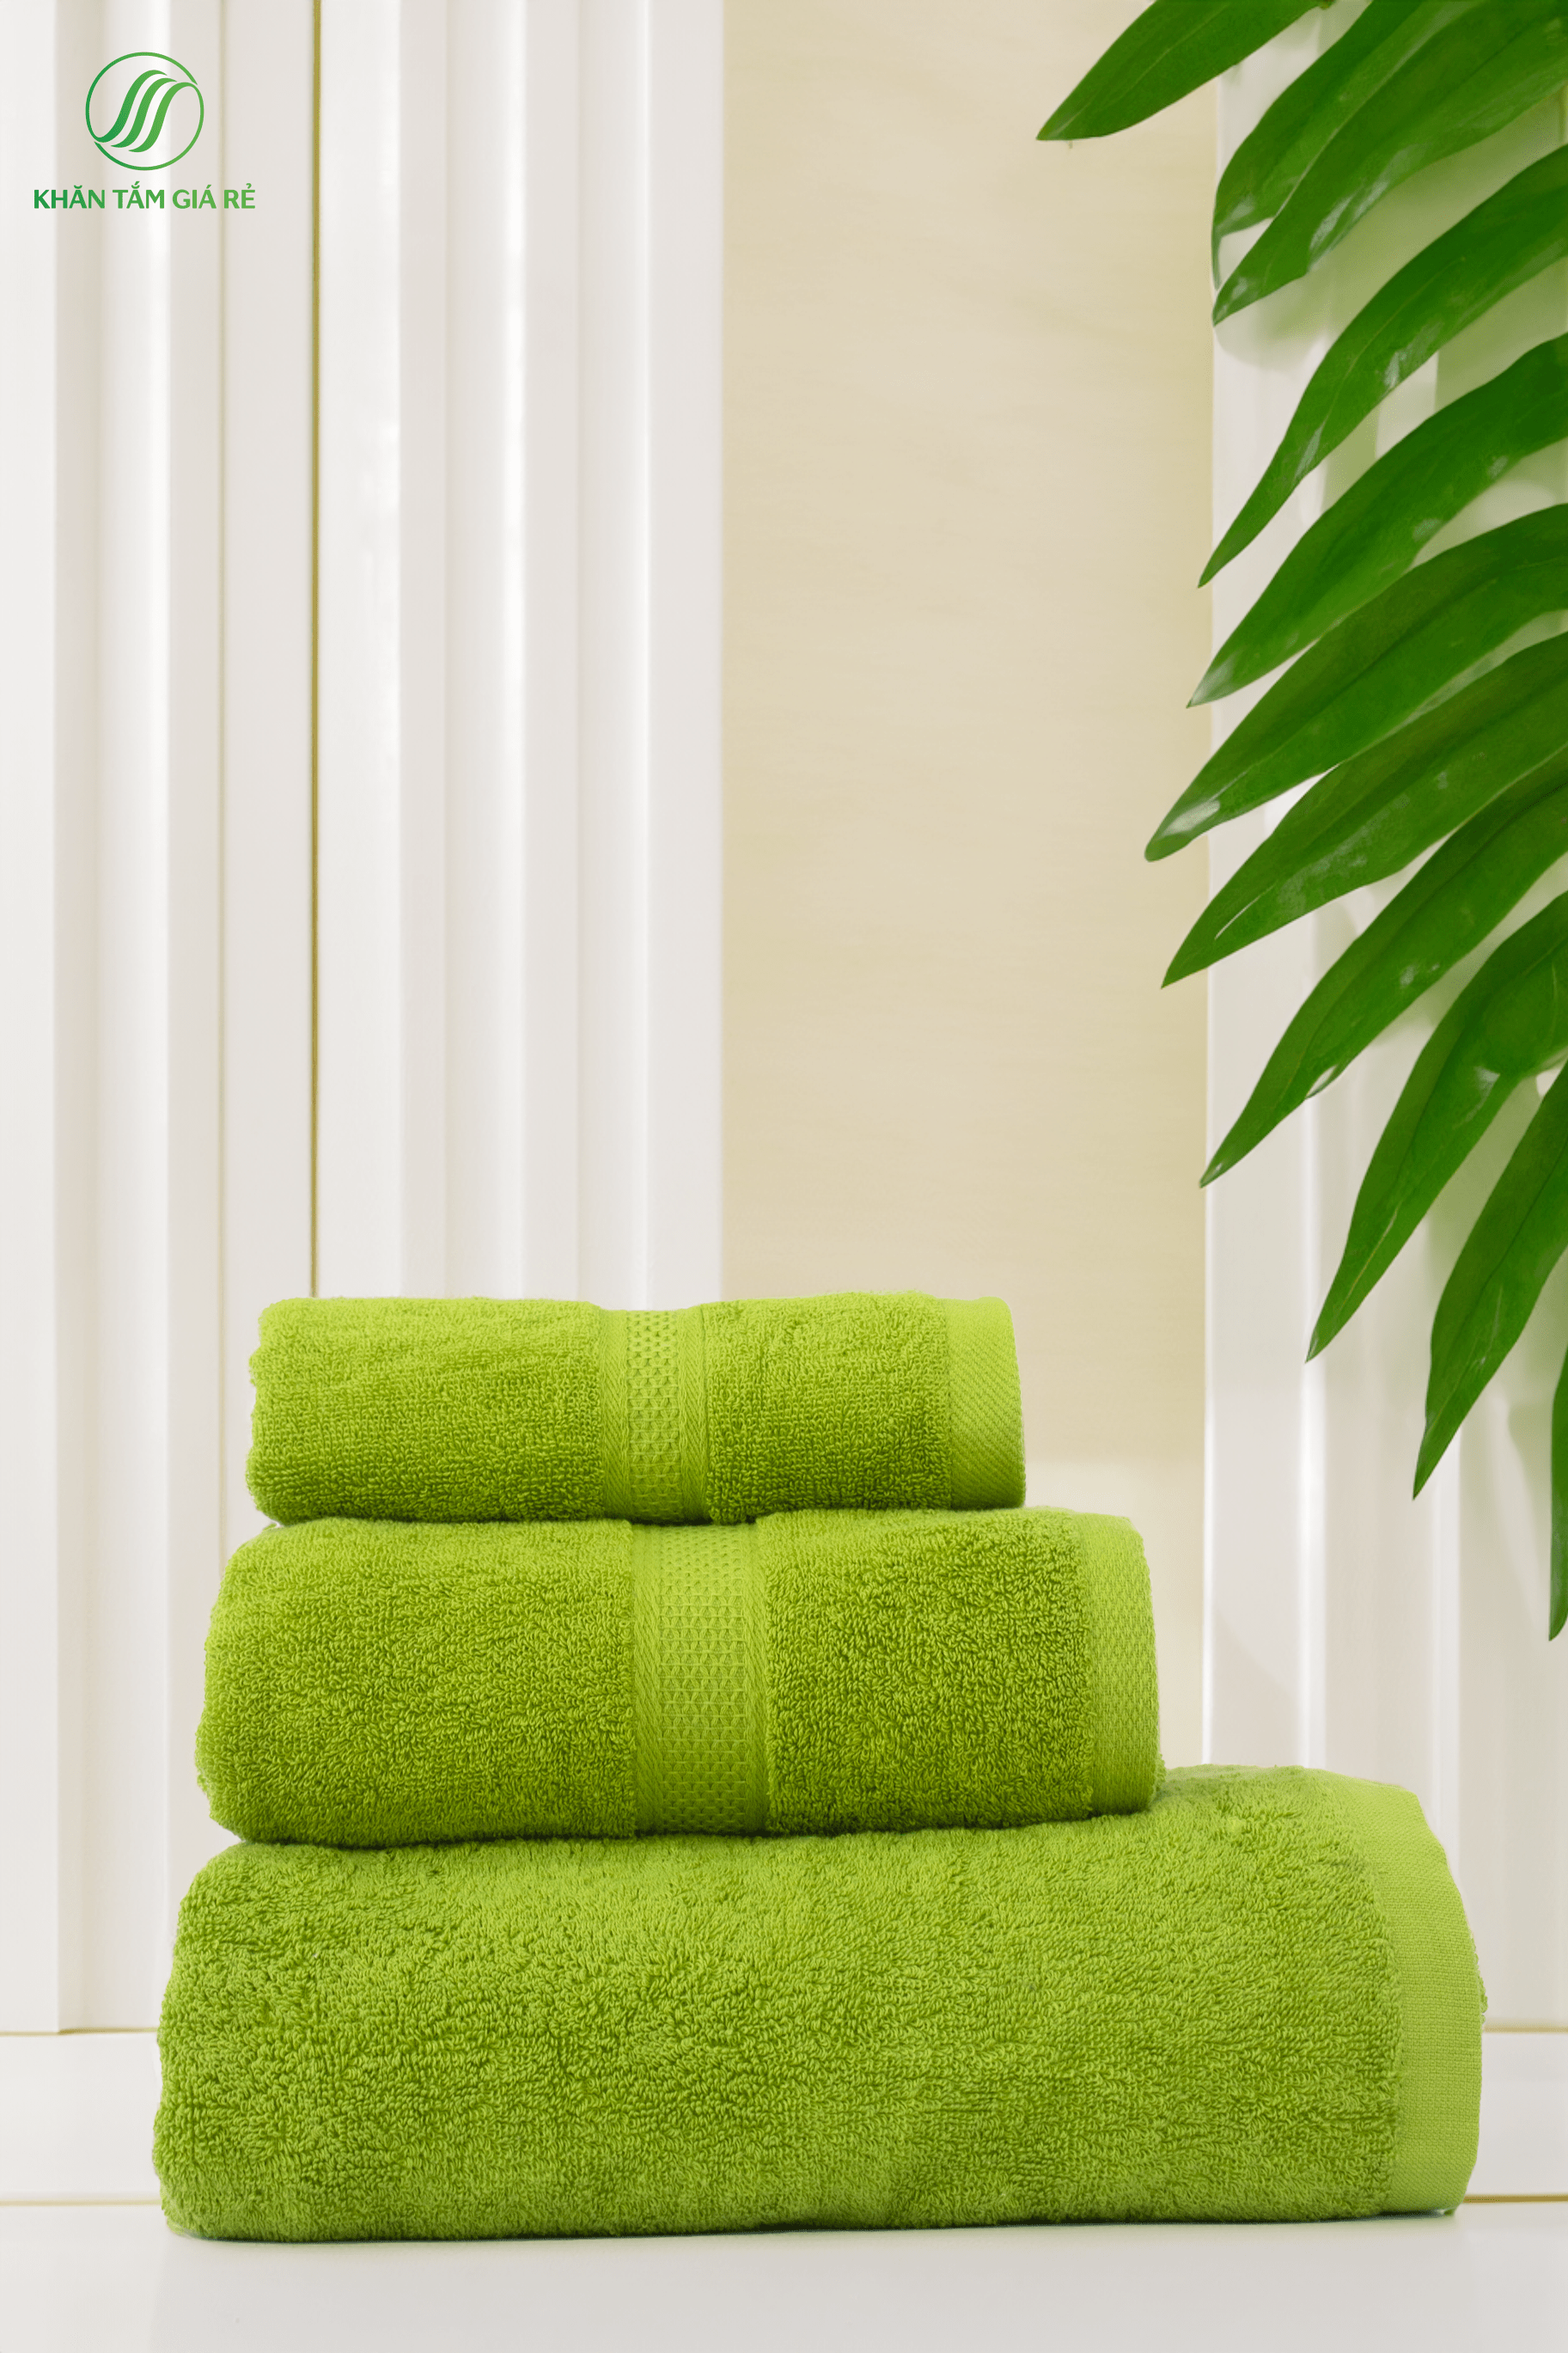 People or choose the hotel towels are white or the light color to create feeling clean, pleasant